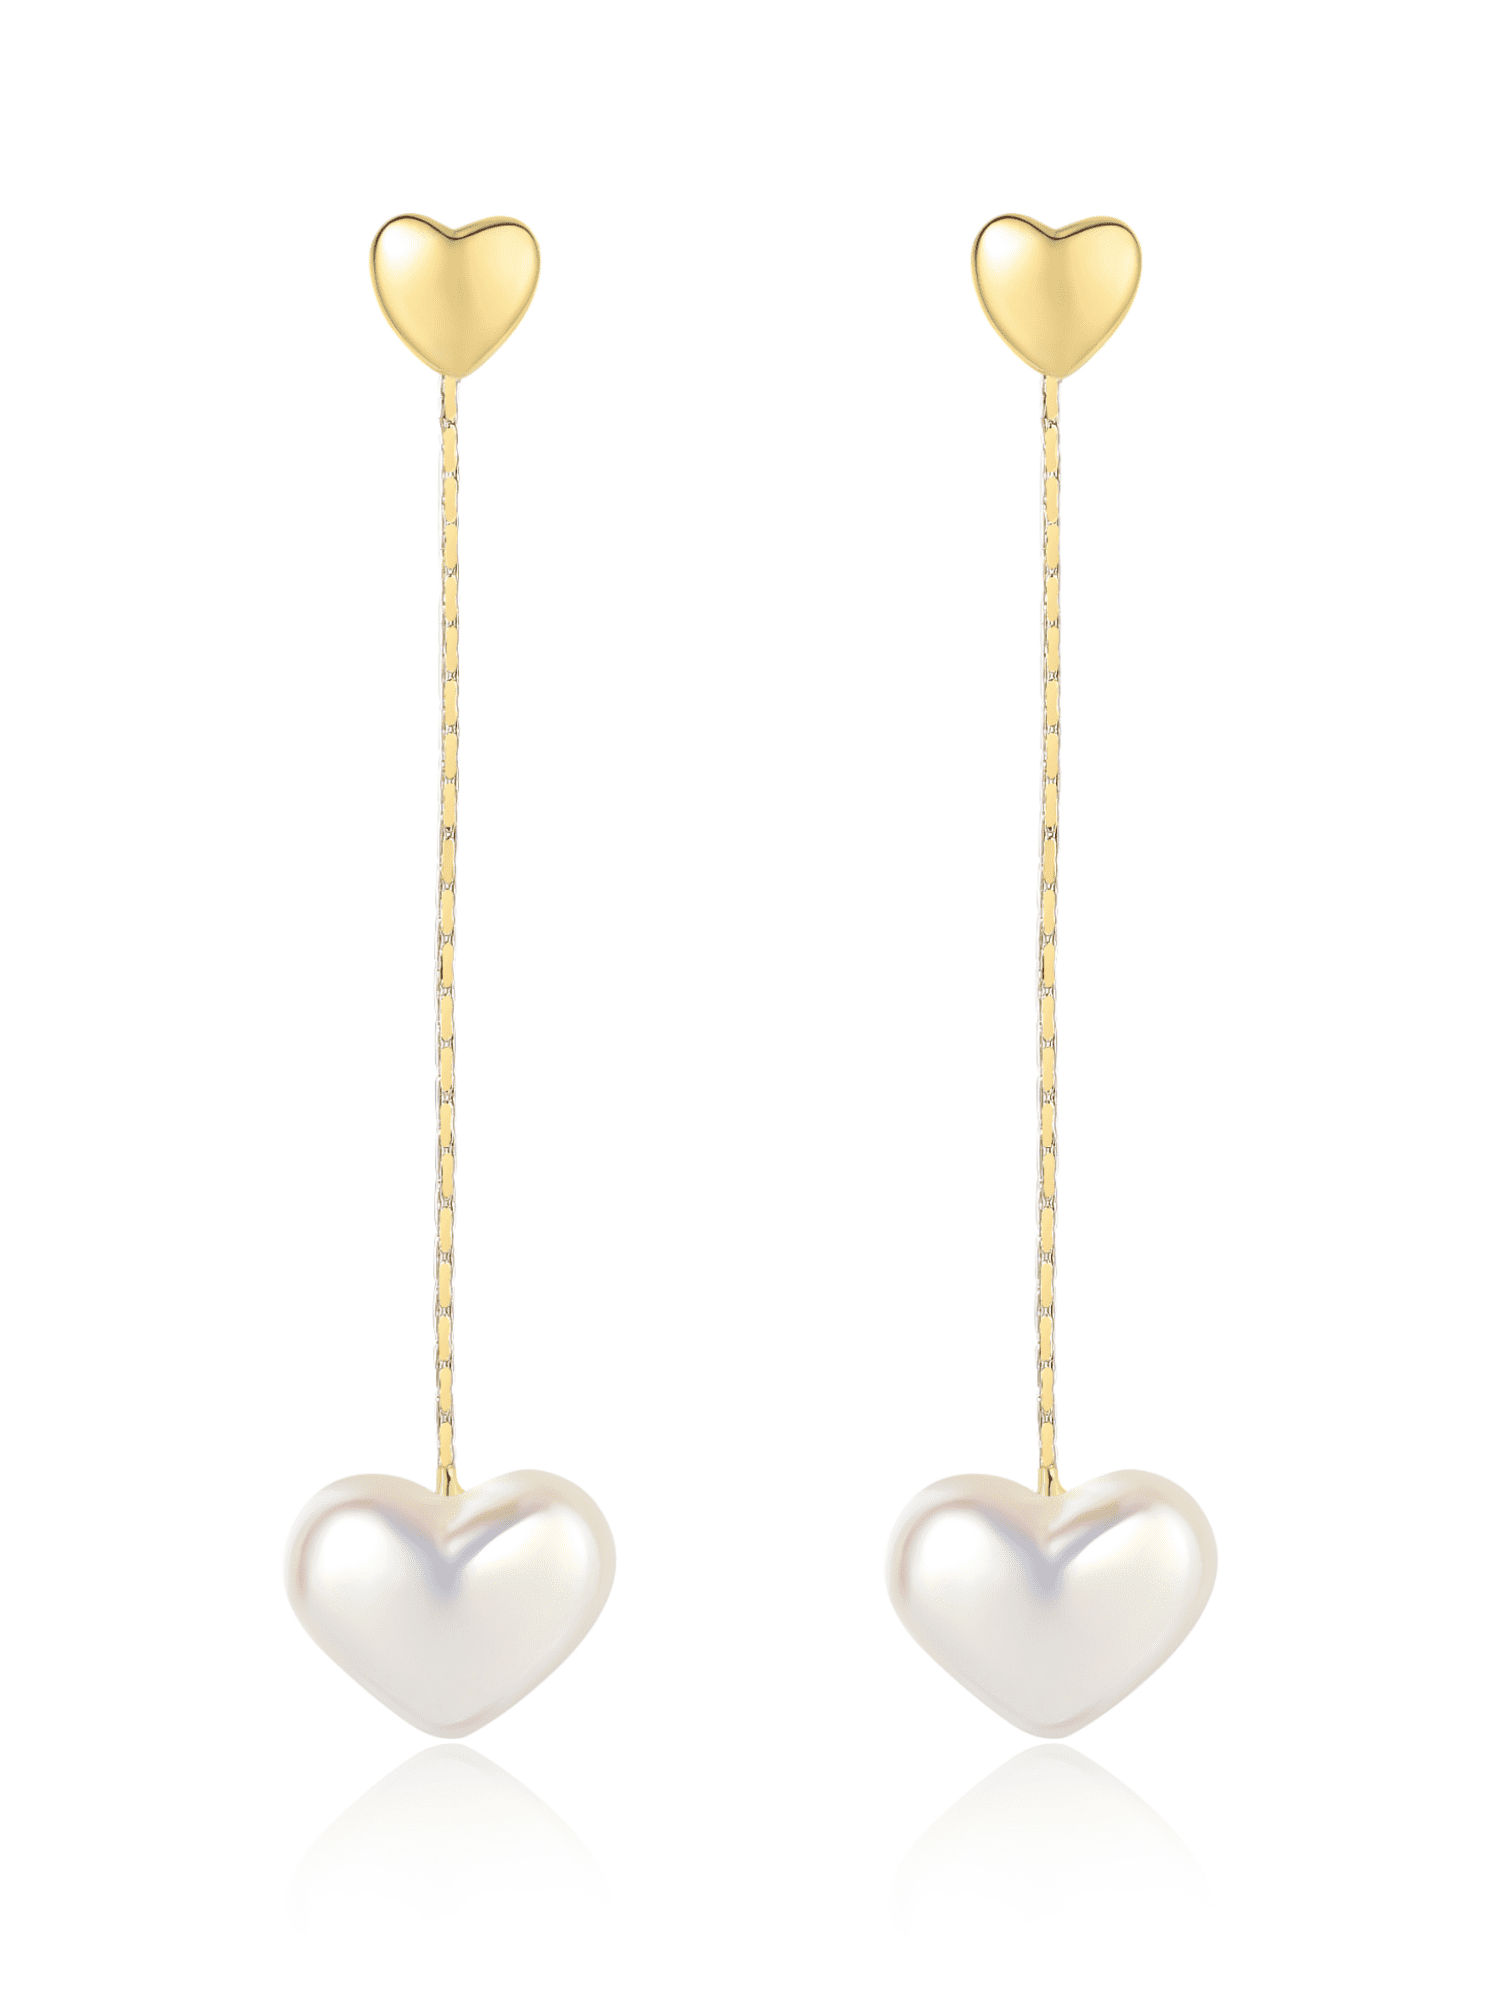 Sterling Silver Plated &18K Gold Plated Hollow Peach Heart Horse Head Charm Dangle Earring